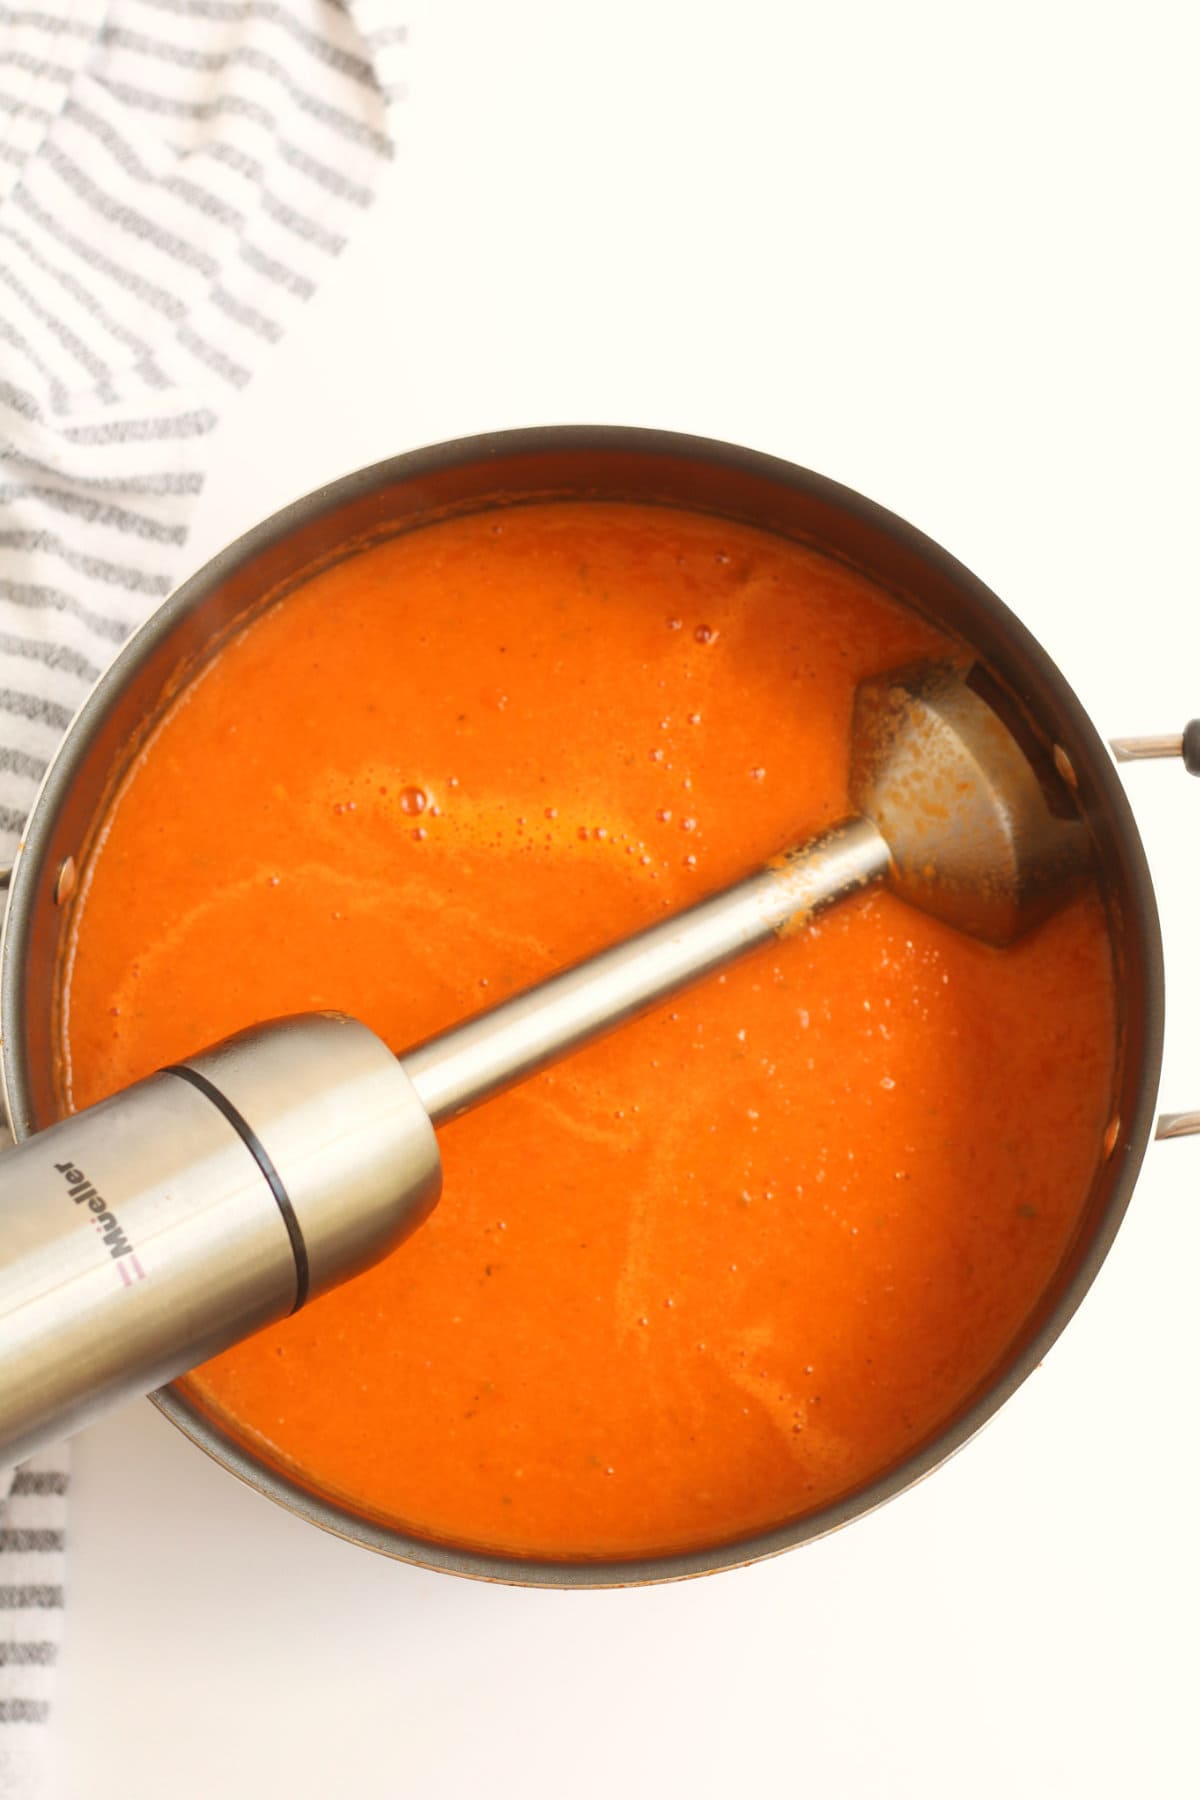 Pot of tomato soup being creamed smooth with an immersion blender.